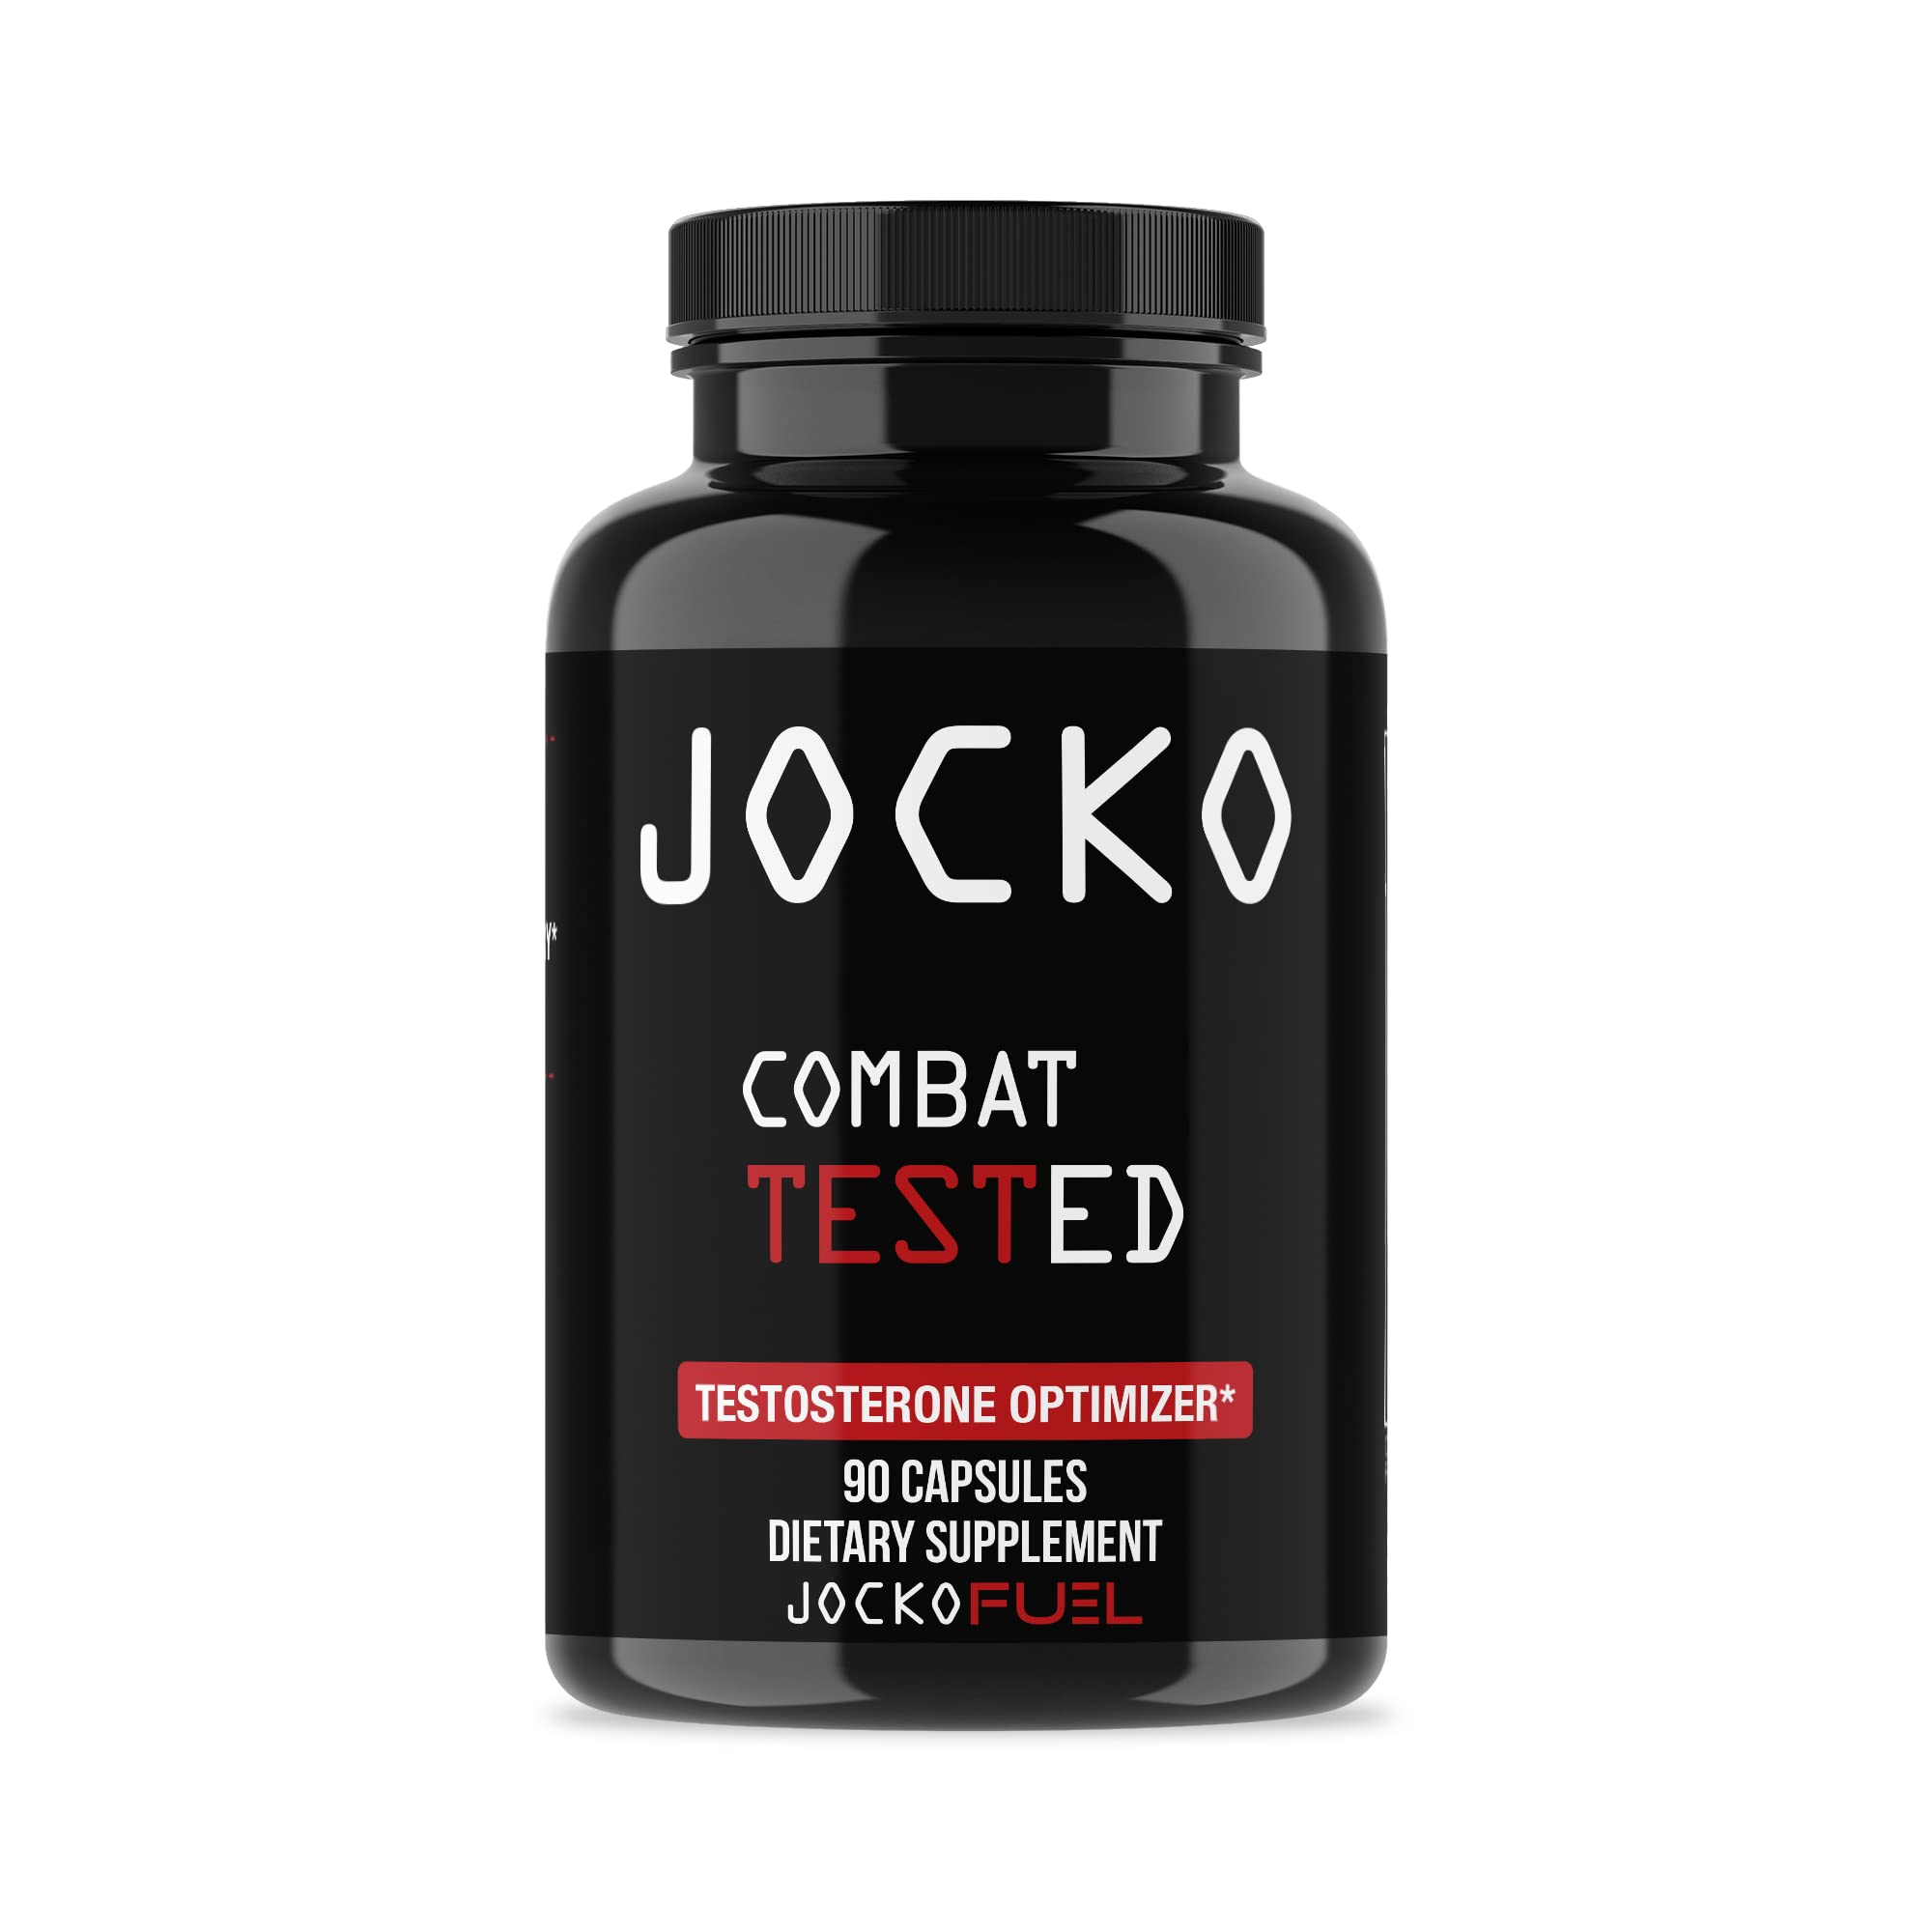 Jocko Fuel Test Booster Supplement - Natural Endurance, Stamina, & Strength Booster - Muscle Builder & Nitric Oxide Booster with Vitamin D, Zinc, & Ashwagandha Root, 90ct